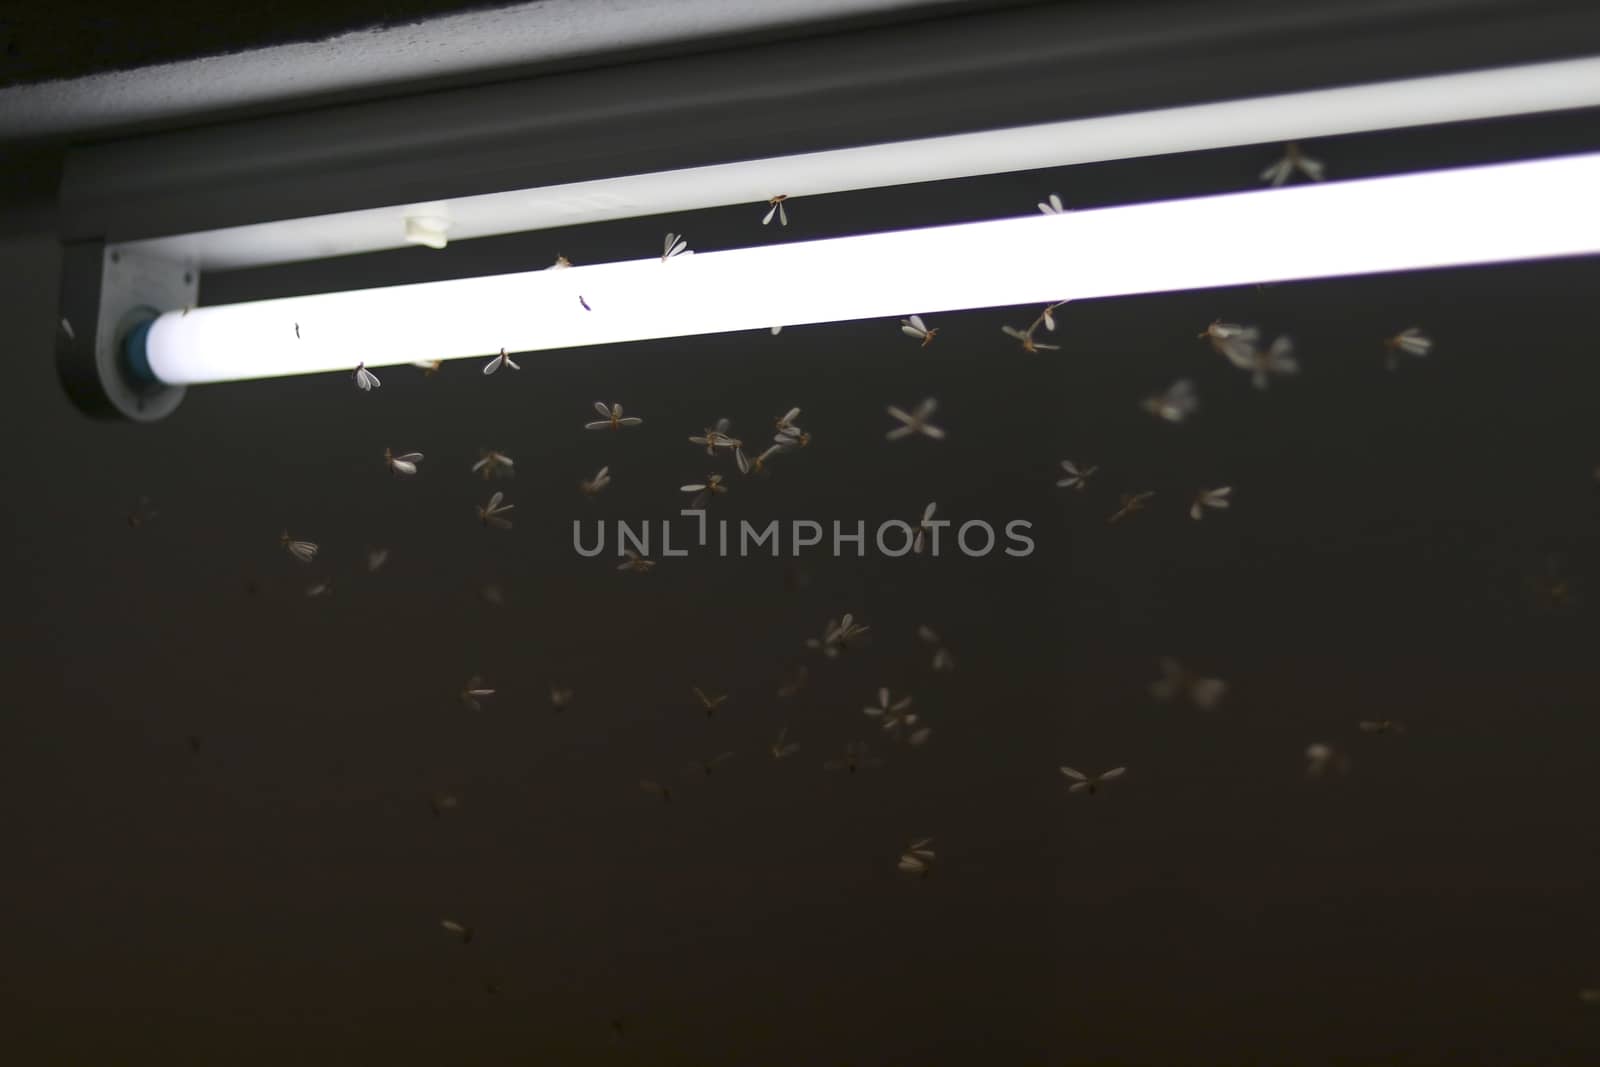 Mayfly are flying, playing around the fluorescent lights. by Eungsuwat